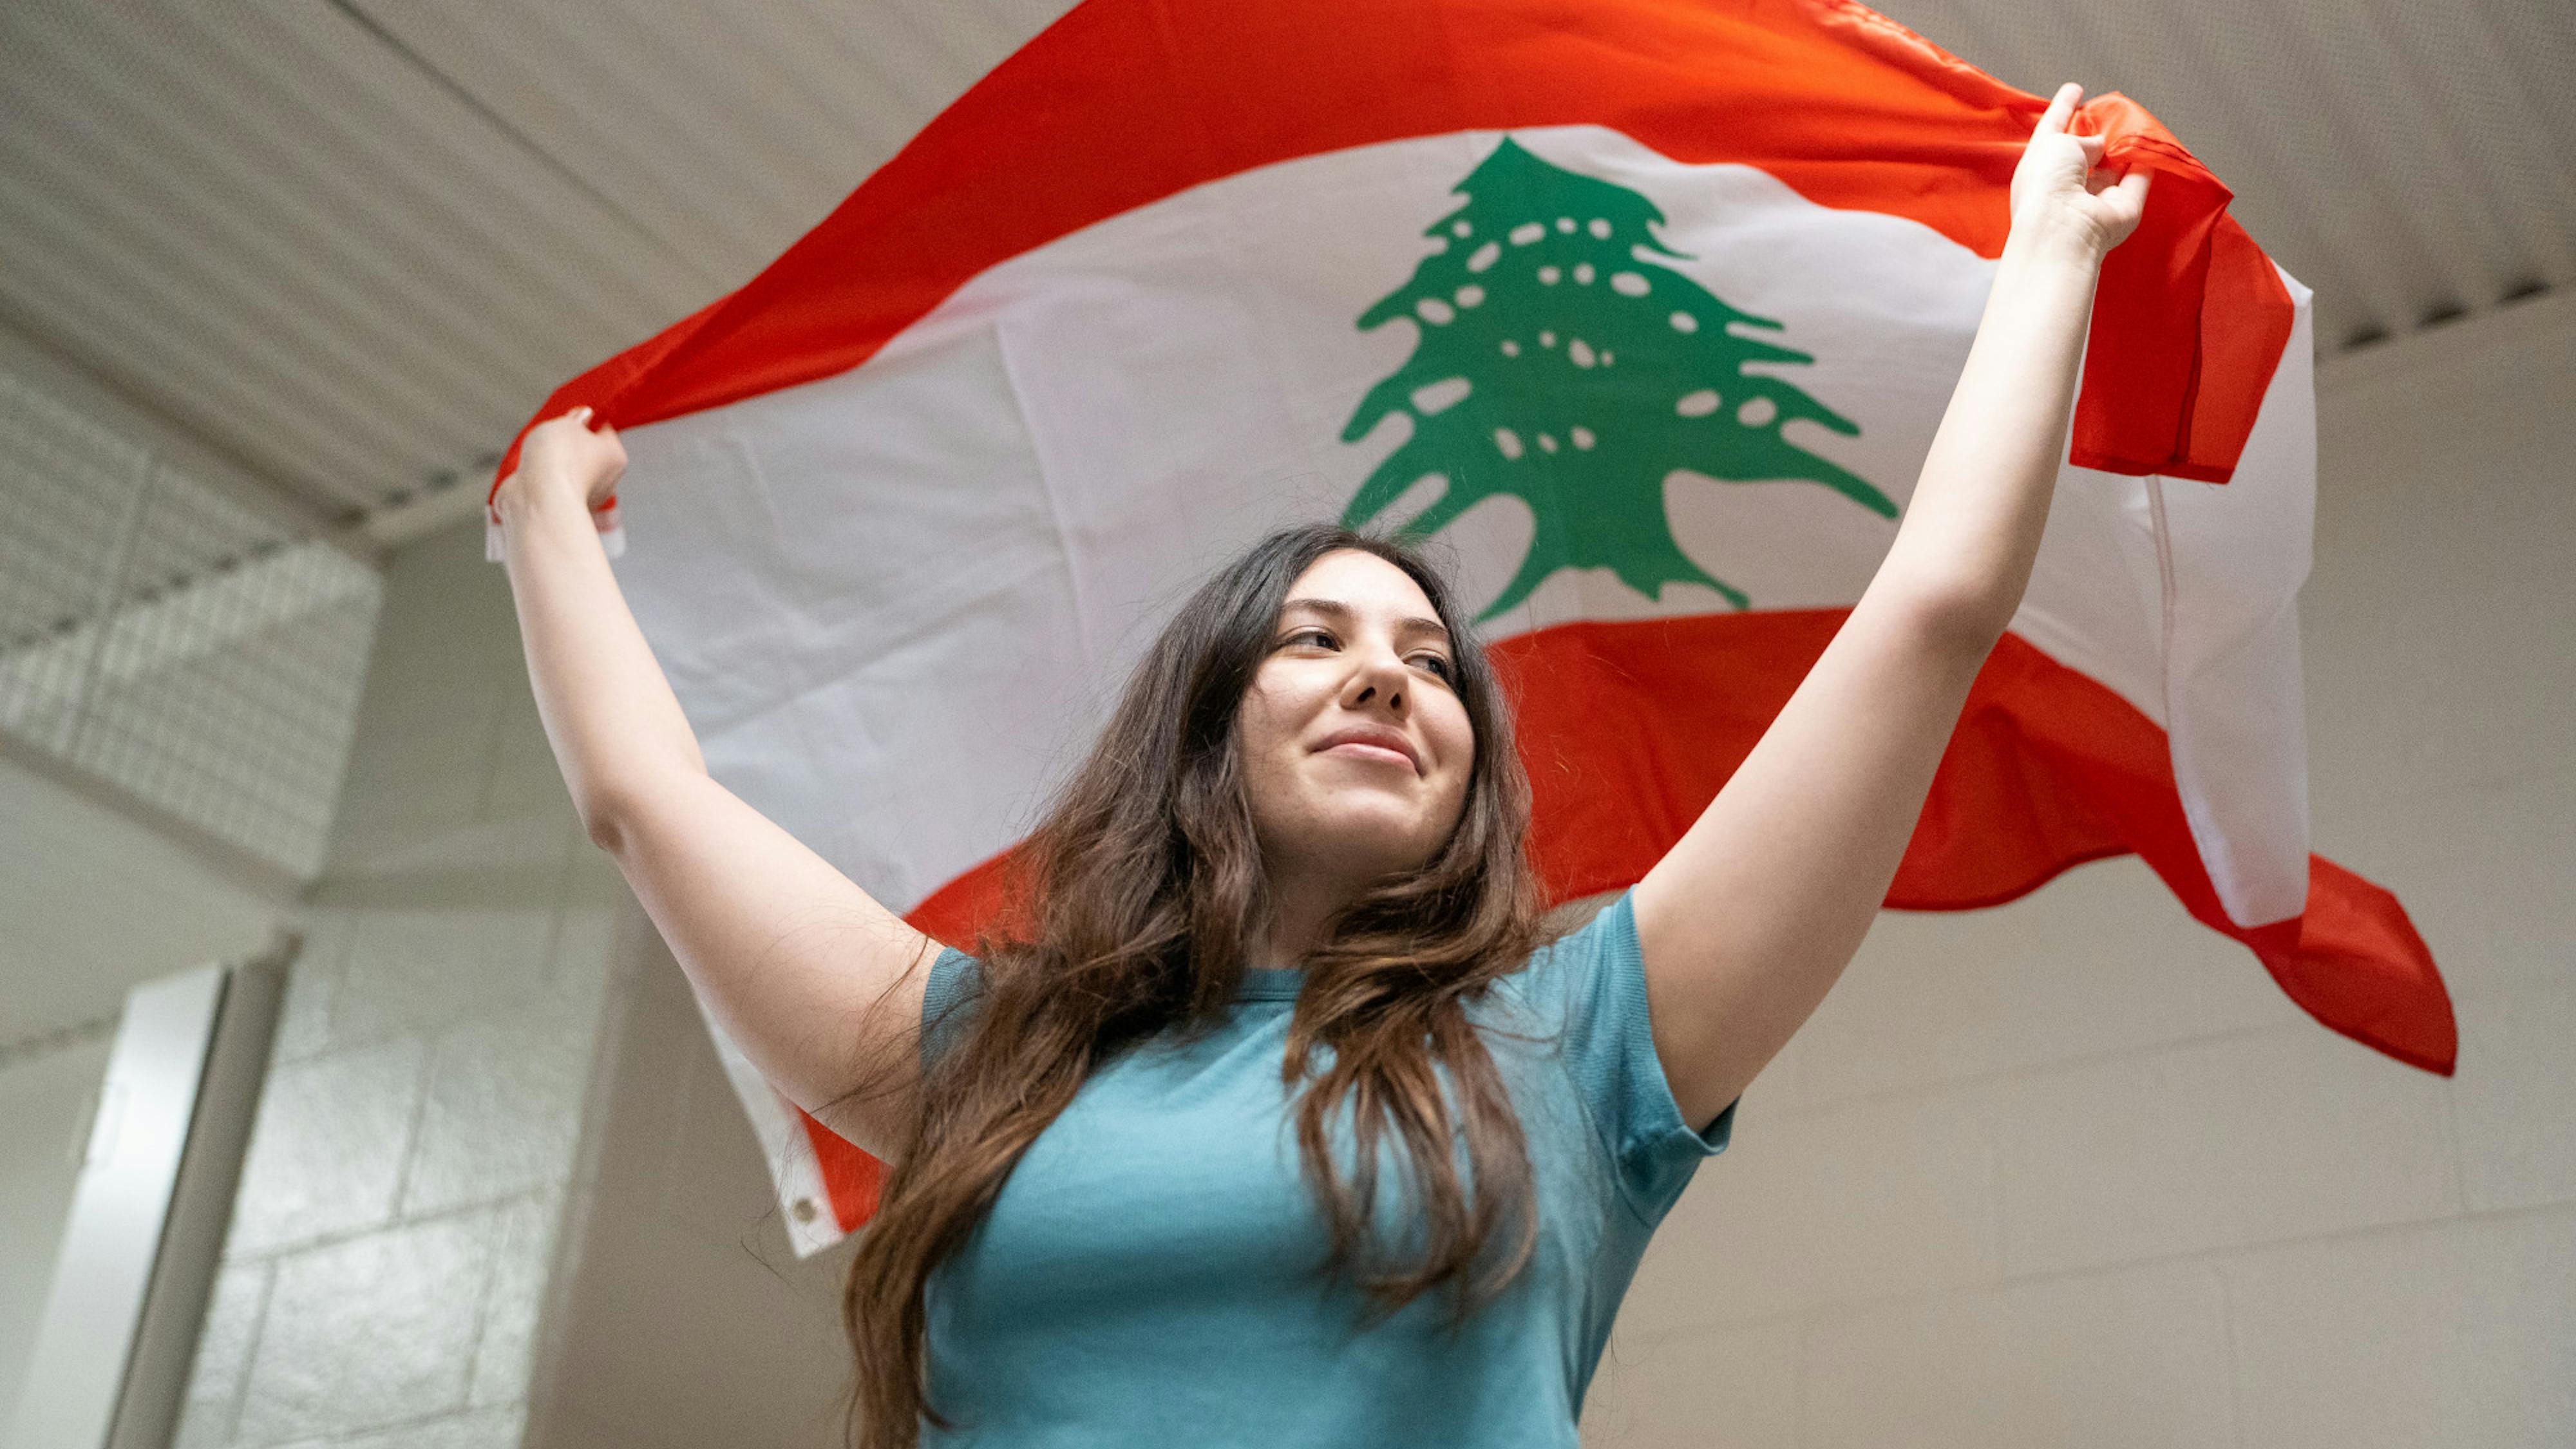 Lebanese Student Association promotes cultural representation, empowerment of heritage